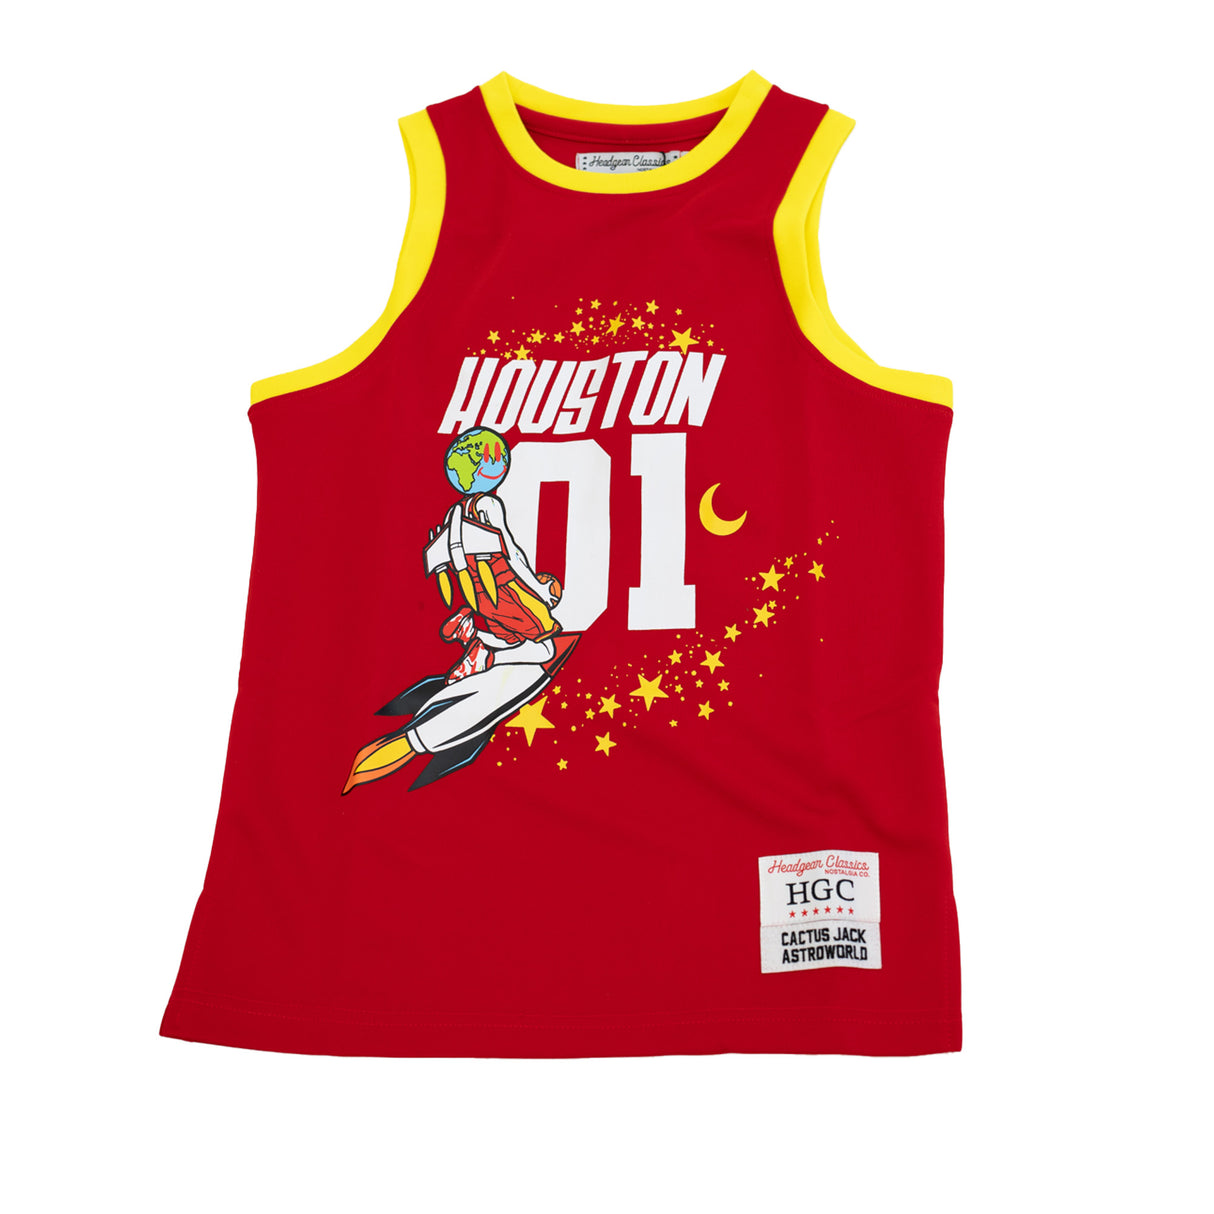 ASTROWORLD CACTUS JACK CEREAL YOUTH BASKETBALL JERSEY (RED)